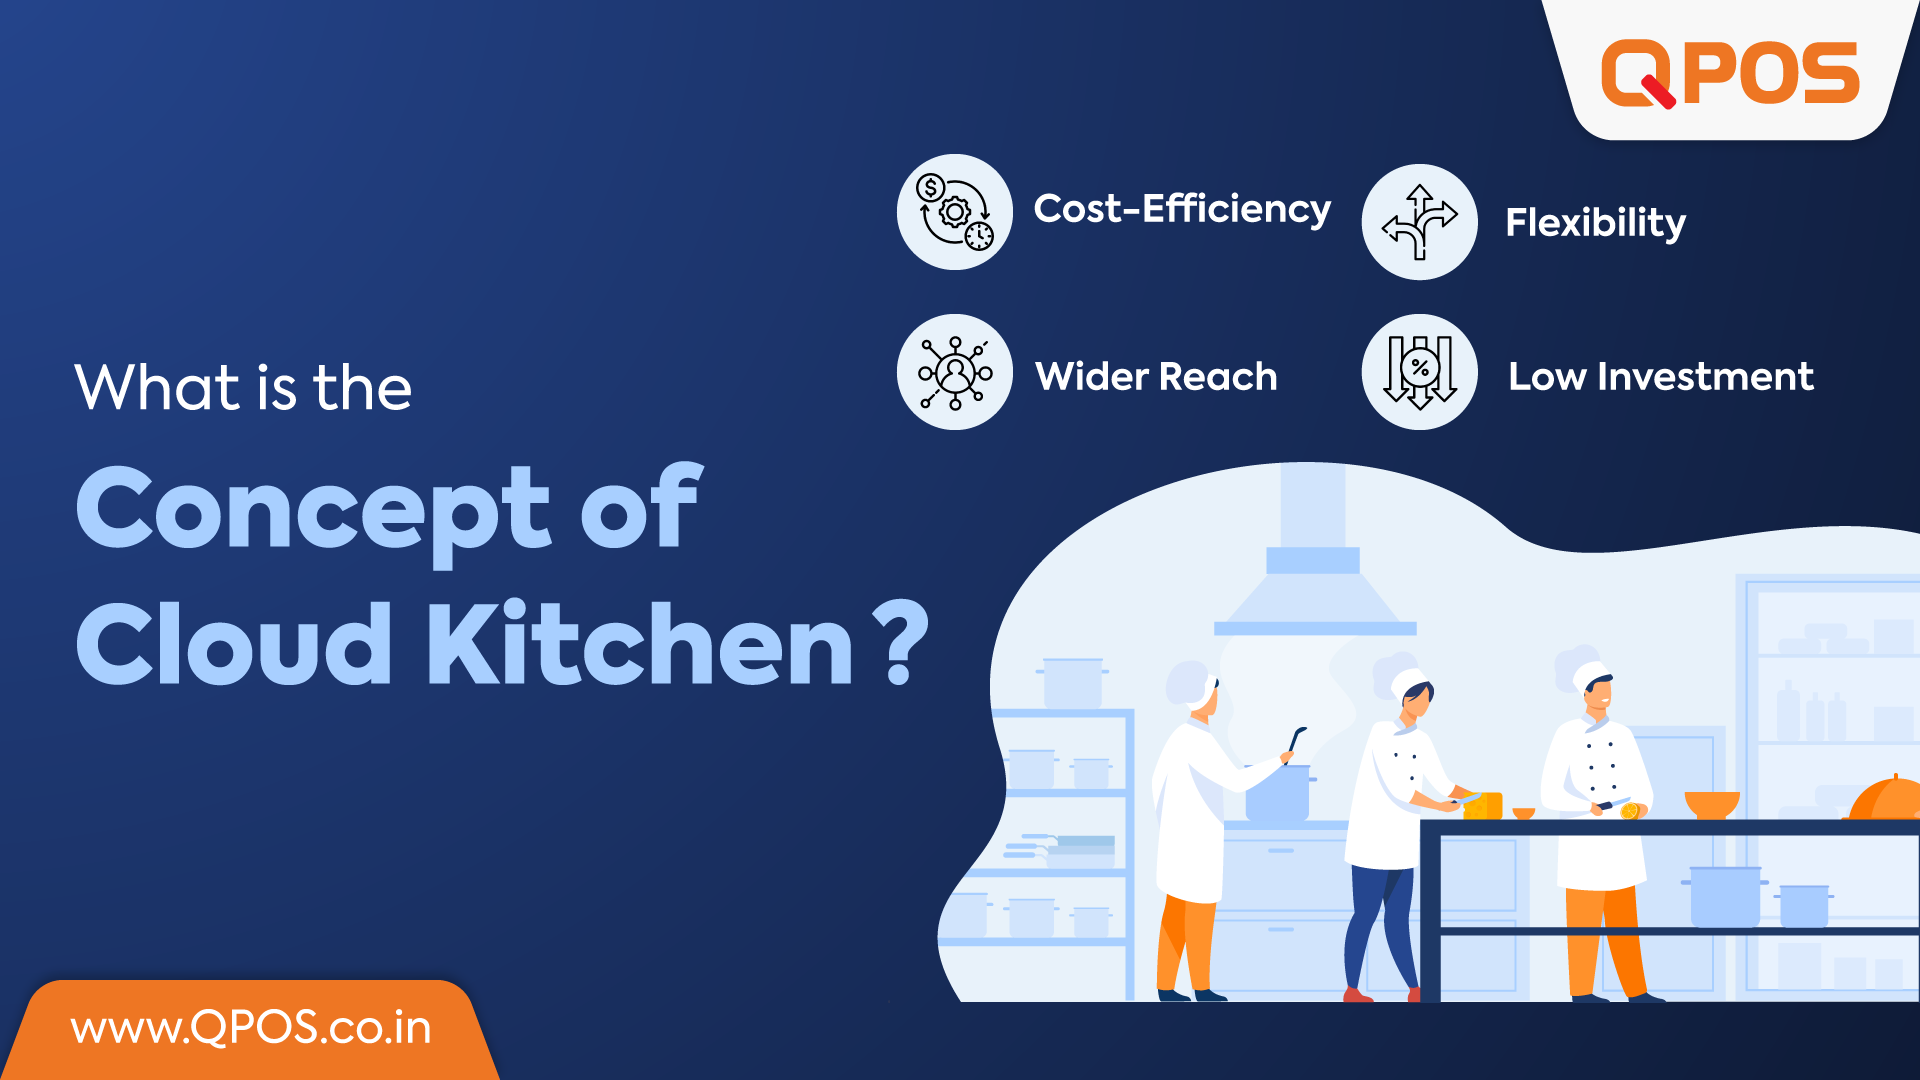 QPOS-What is the concept of cloud kitchen